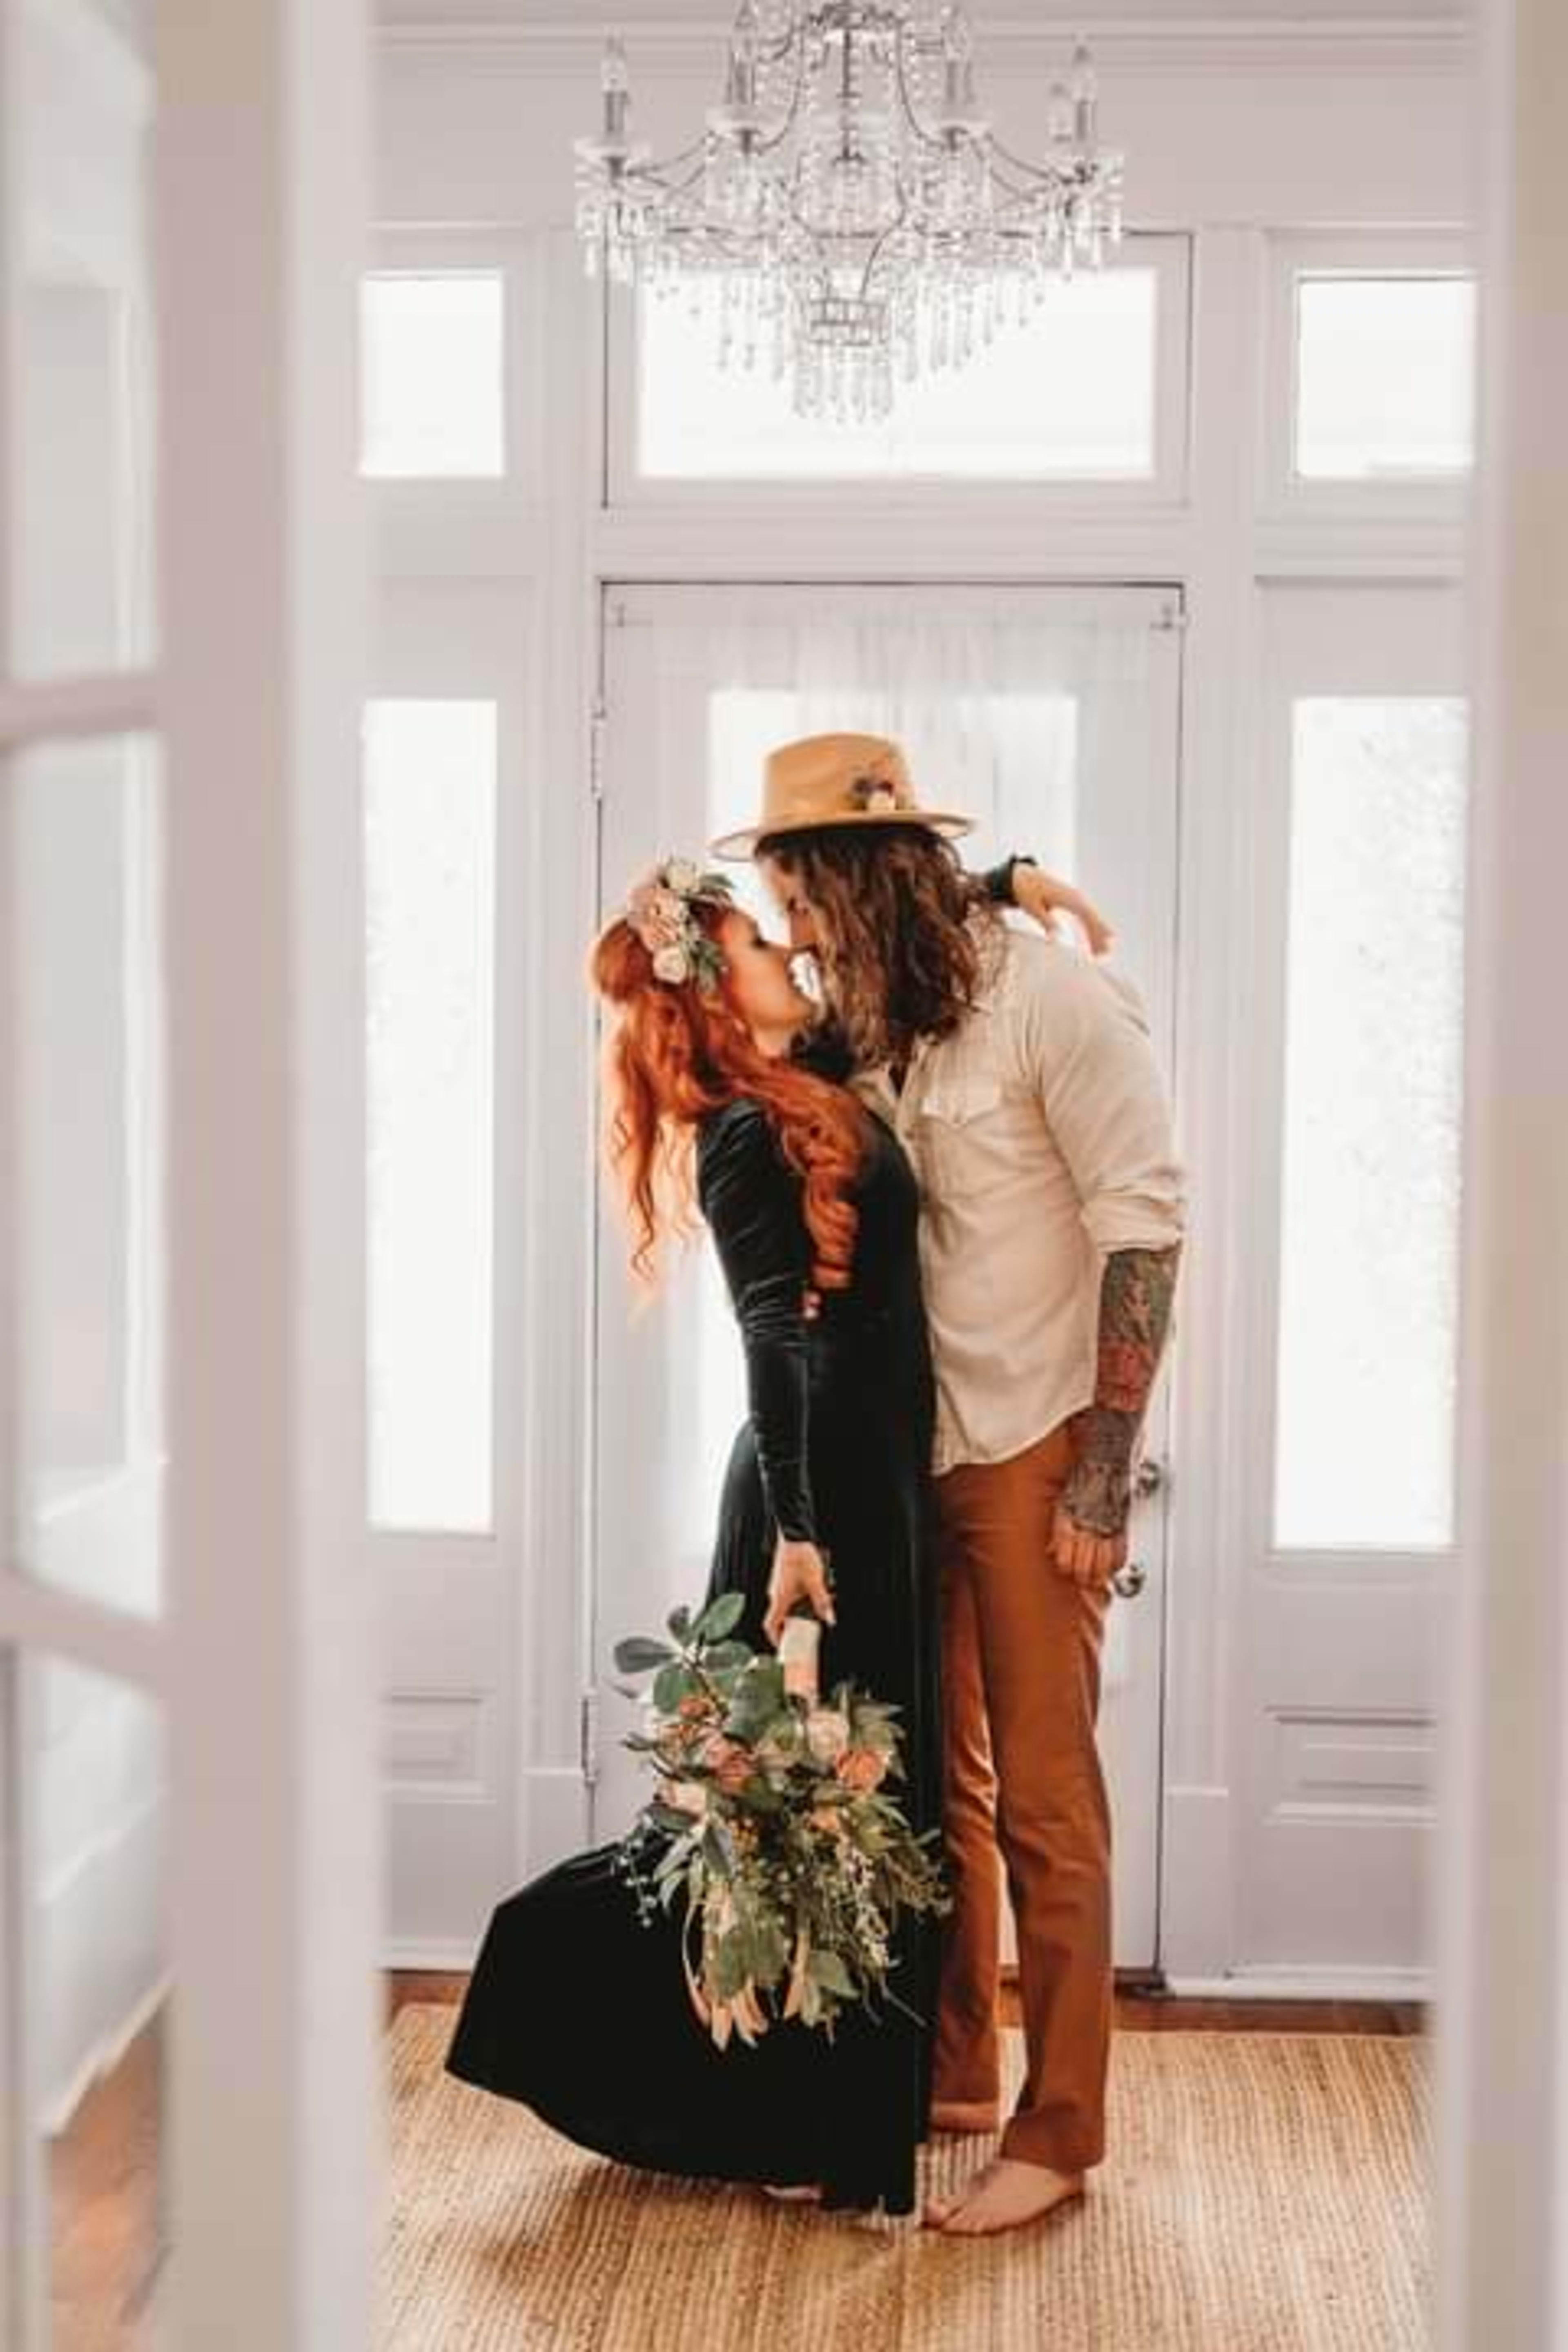 A couple standing next to each other in a white indoor setting.